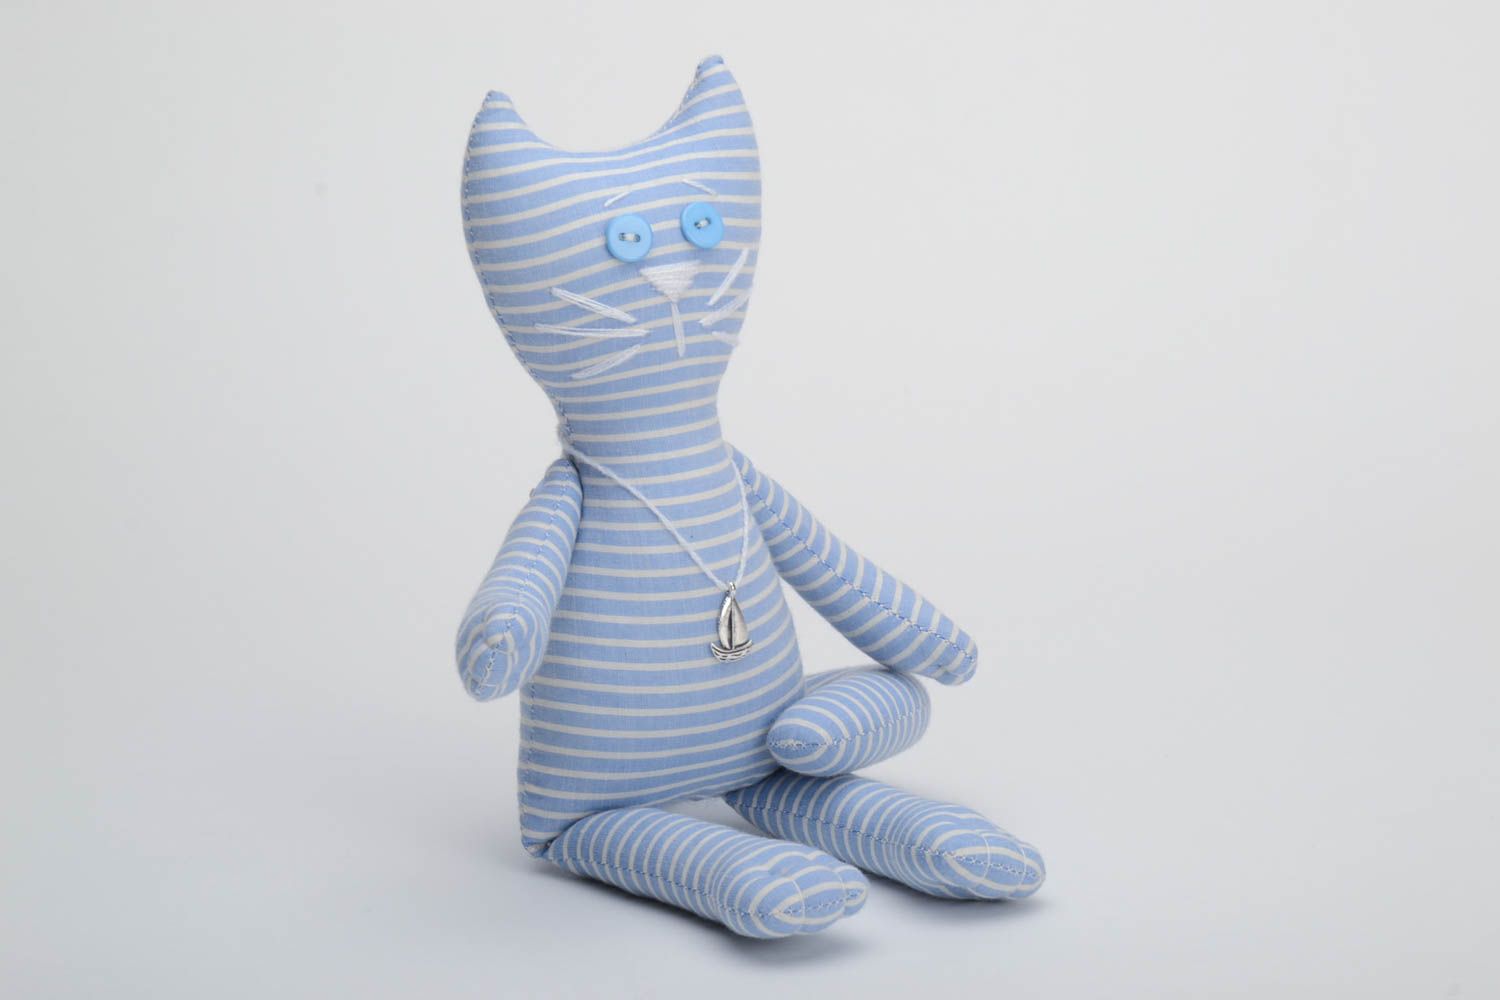 Handmade designer blue striped cotton fabric soft toy cat with long tail photo 2